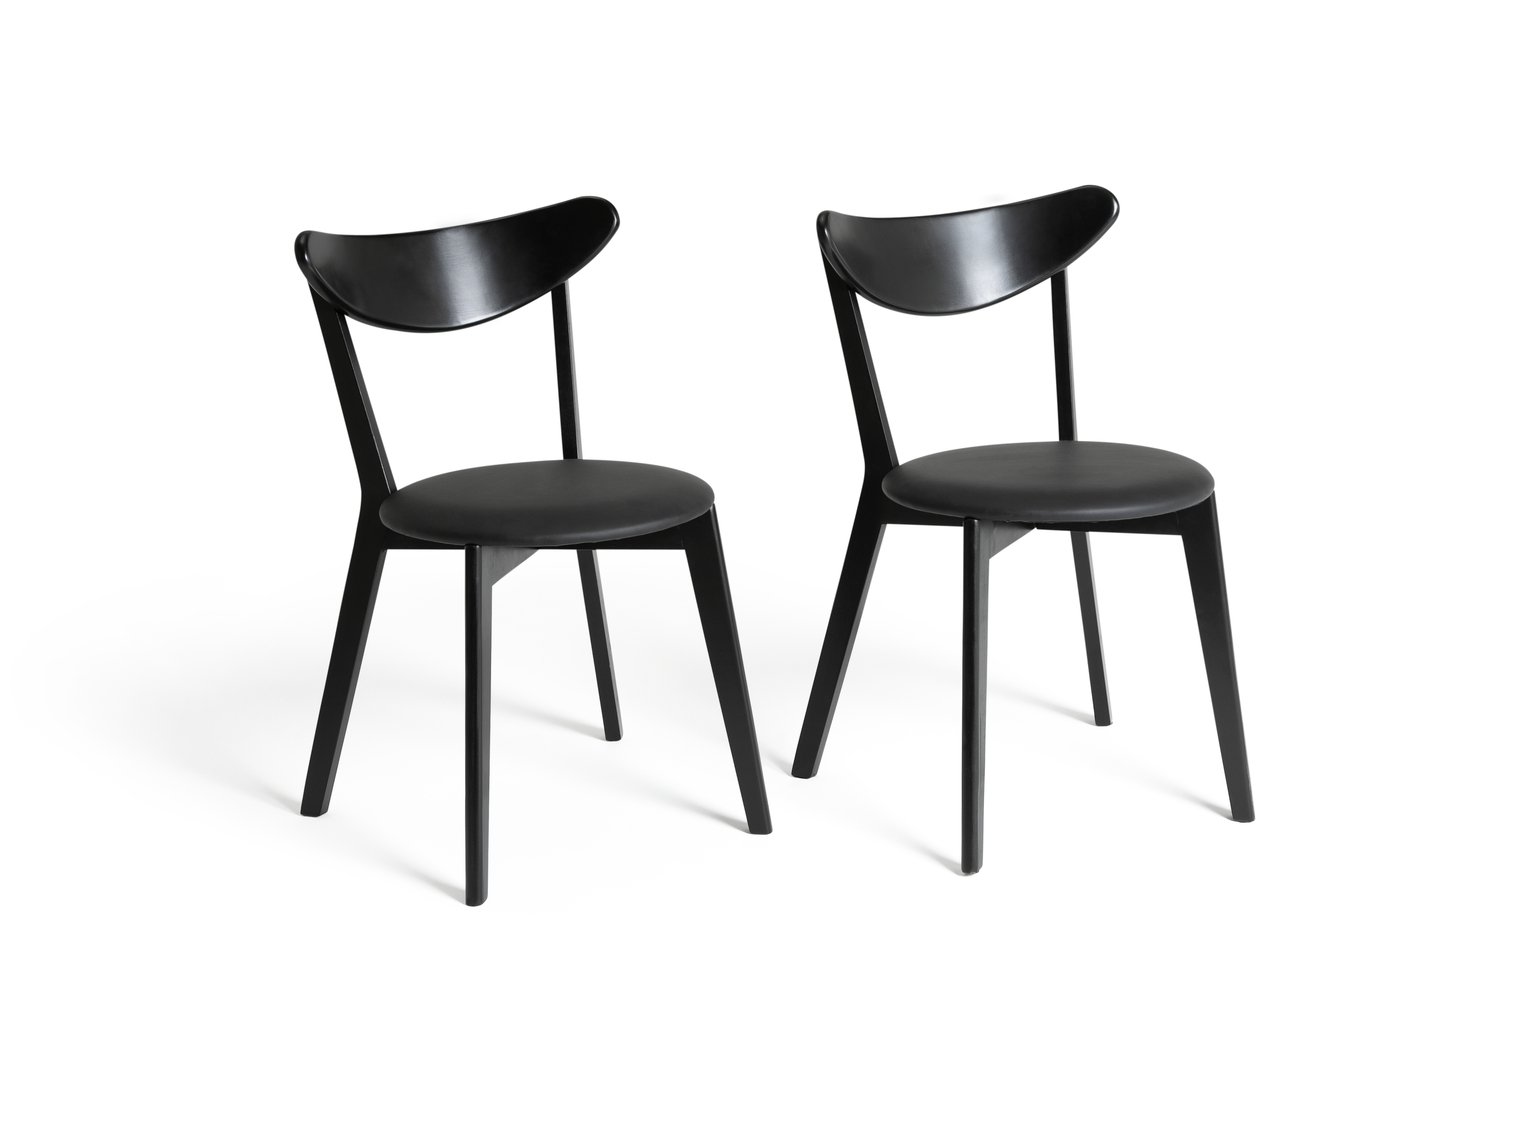 Habitat Sophie Pair of Faux Leather Dining Chair - Black